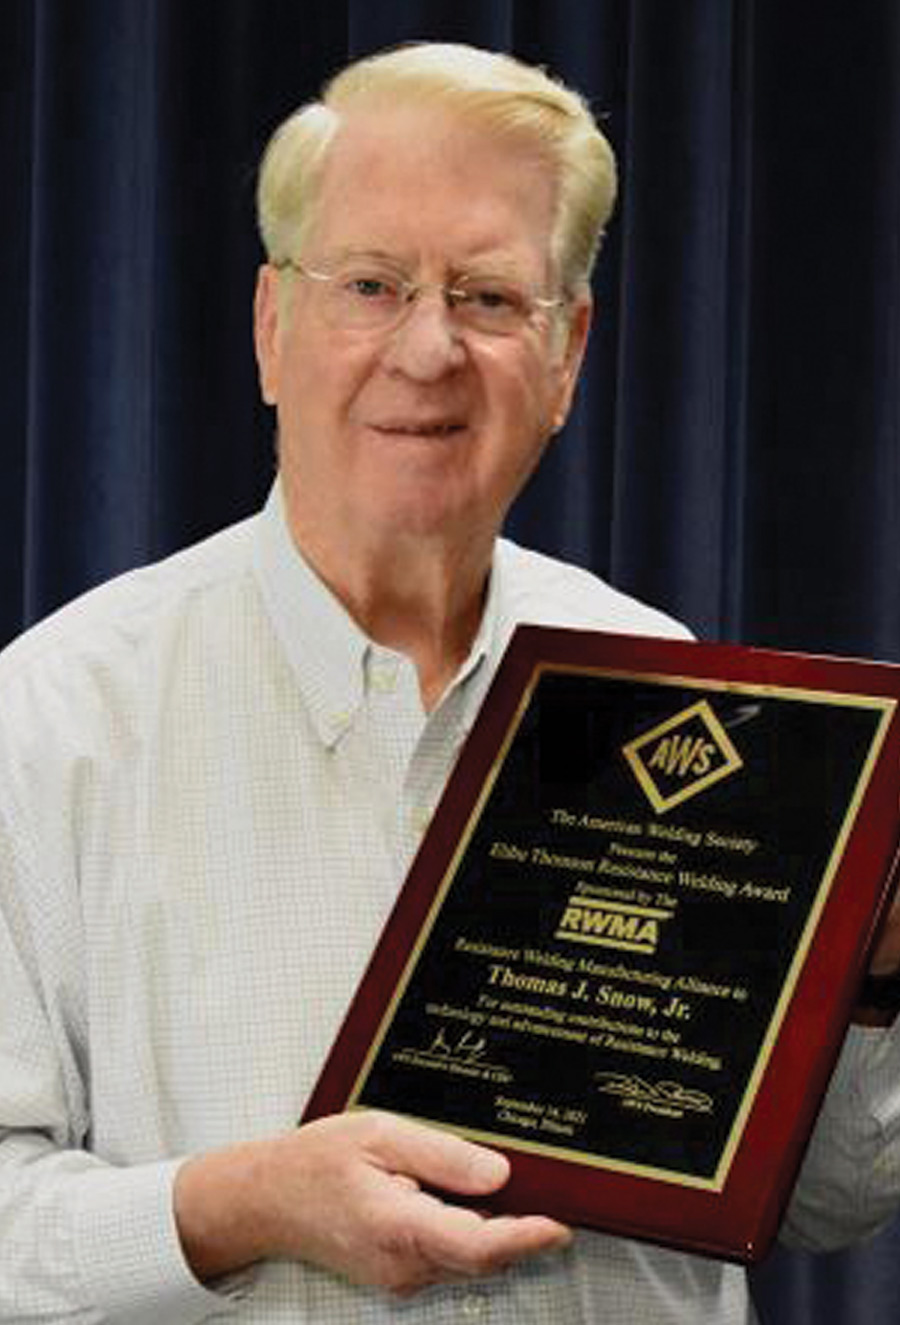 image of Tom Snow holding an award plaque